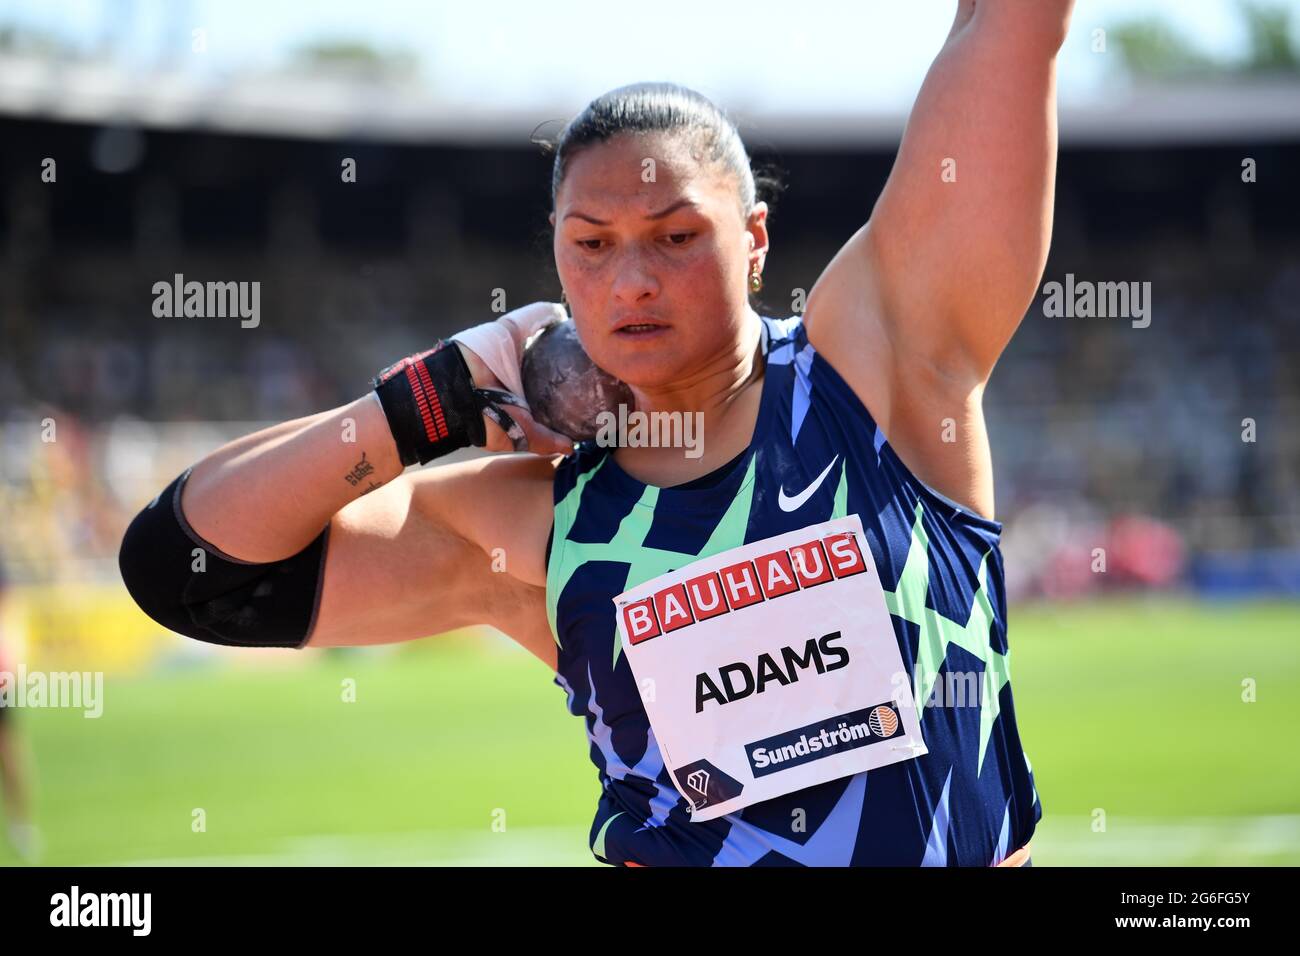 Valerie Adams (NZL) wins the women's shot put at 63-2 1/4 (19.26m) at the Bauhaus Galan at Olympiastadion, Sunday, July 4, 2021, in Stockholm, Sweden. Stock Photo